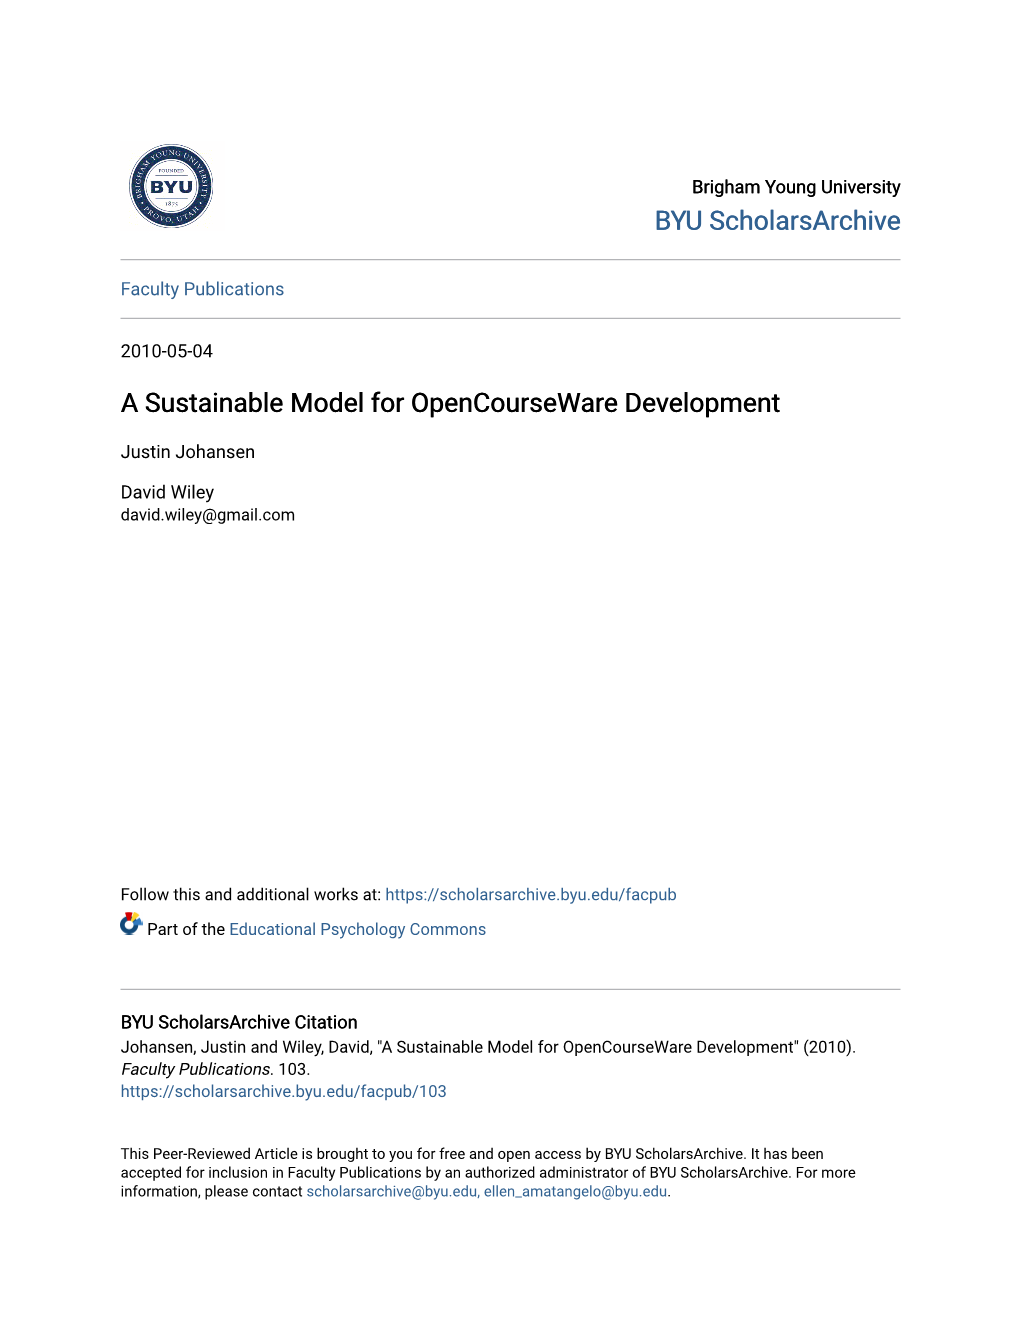 A Sustainable Model for Opencourseware Development